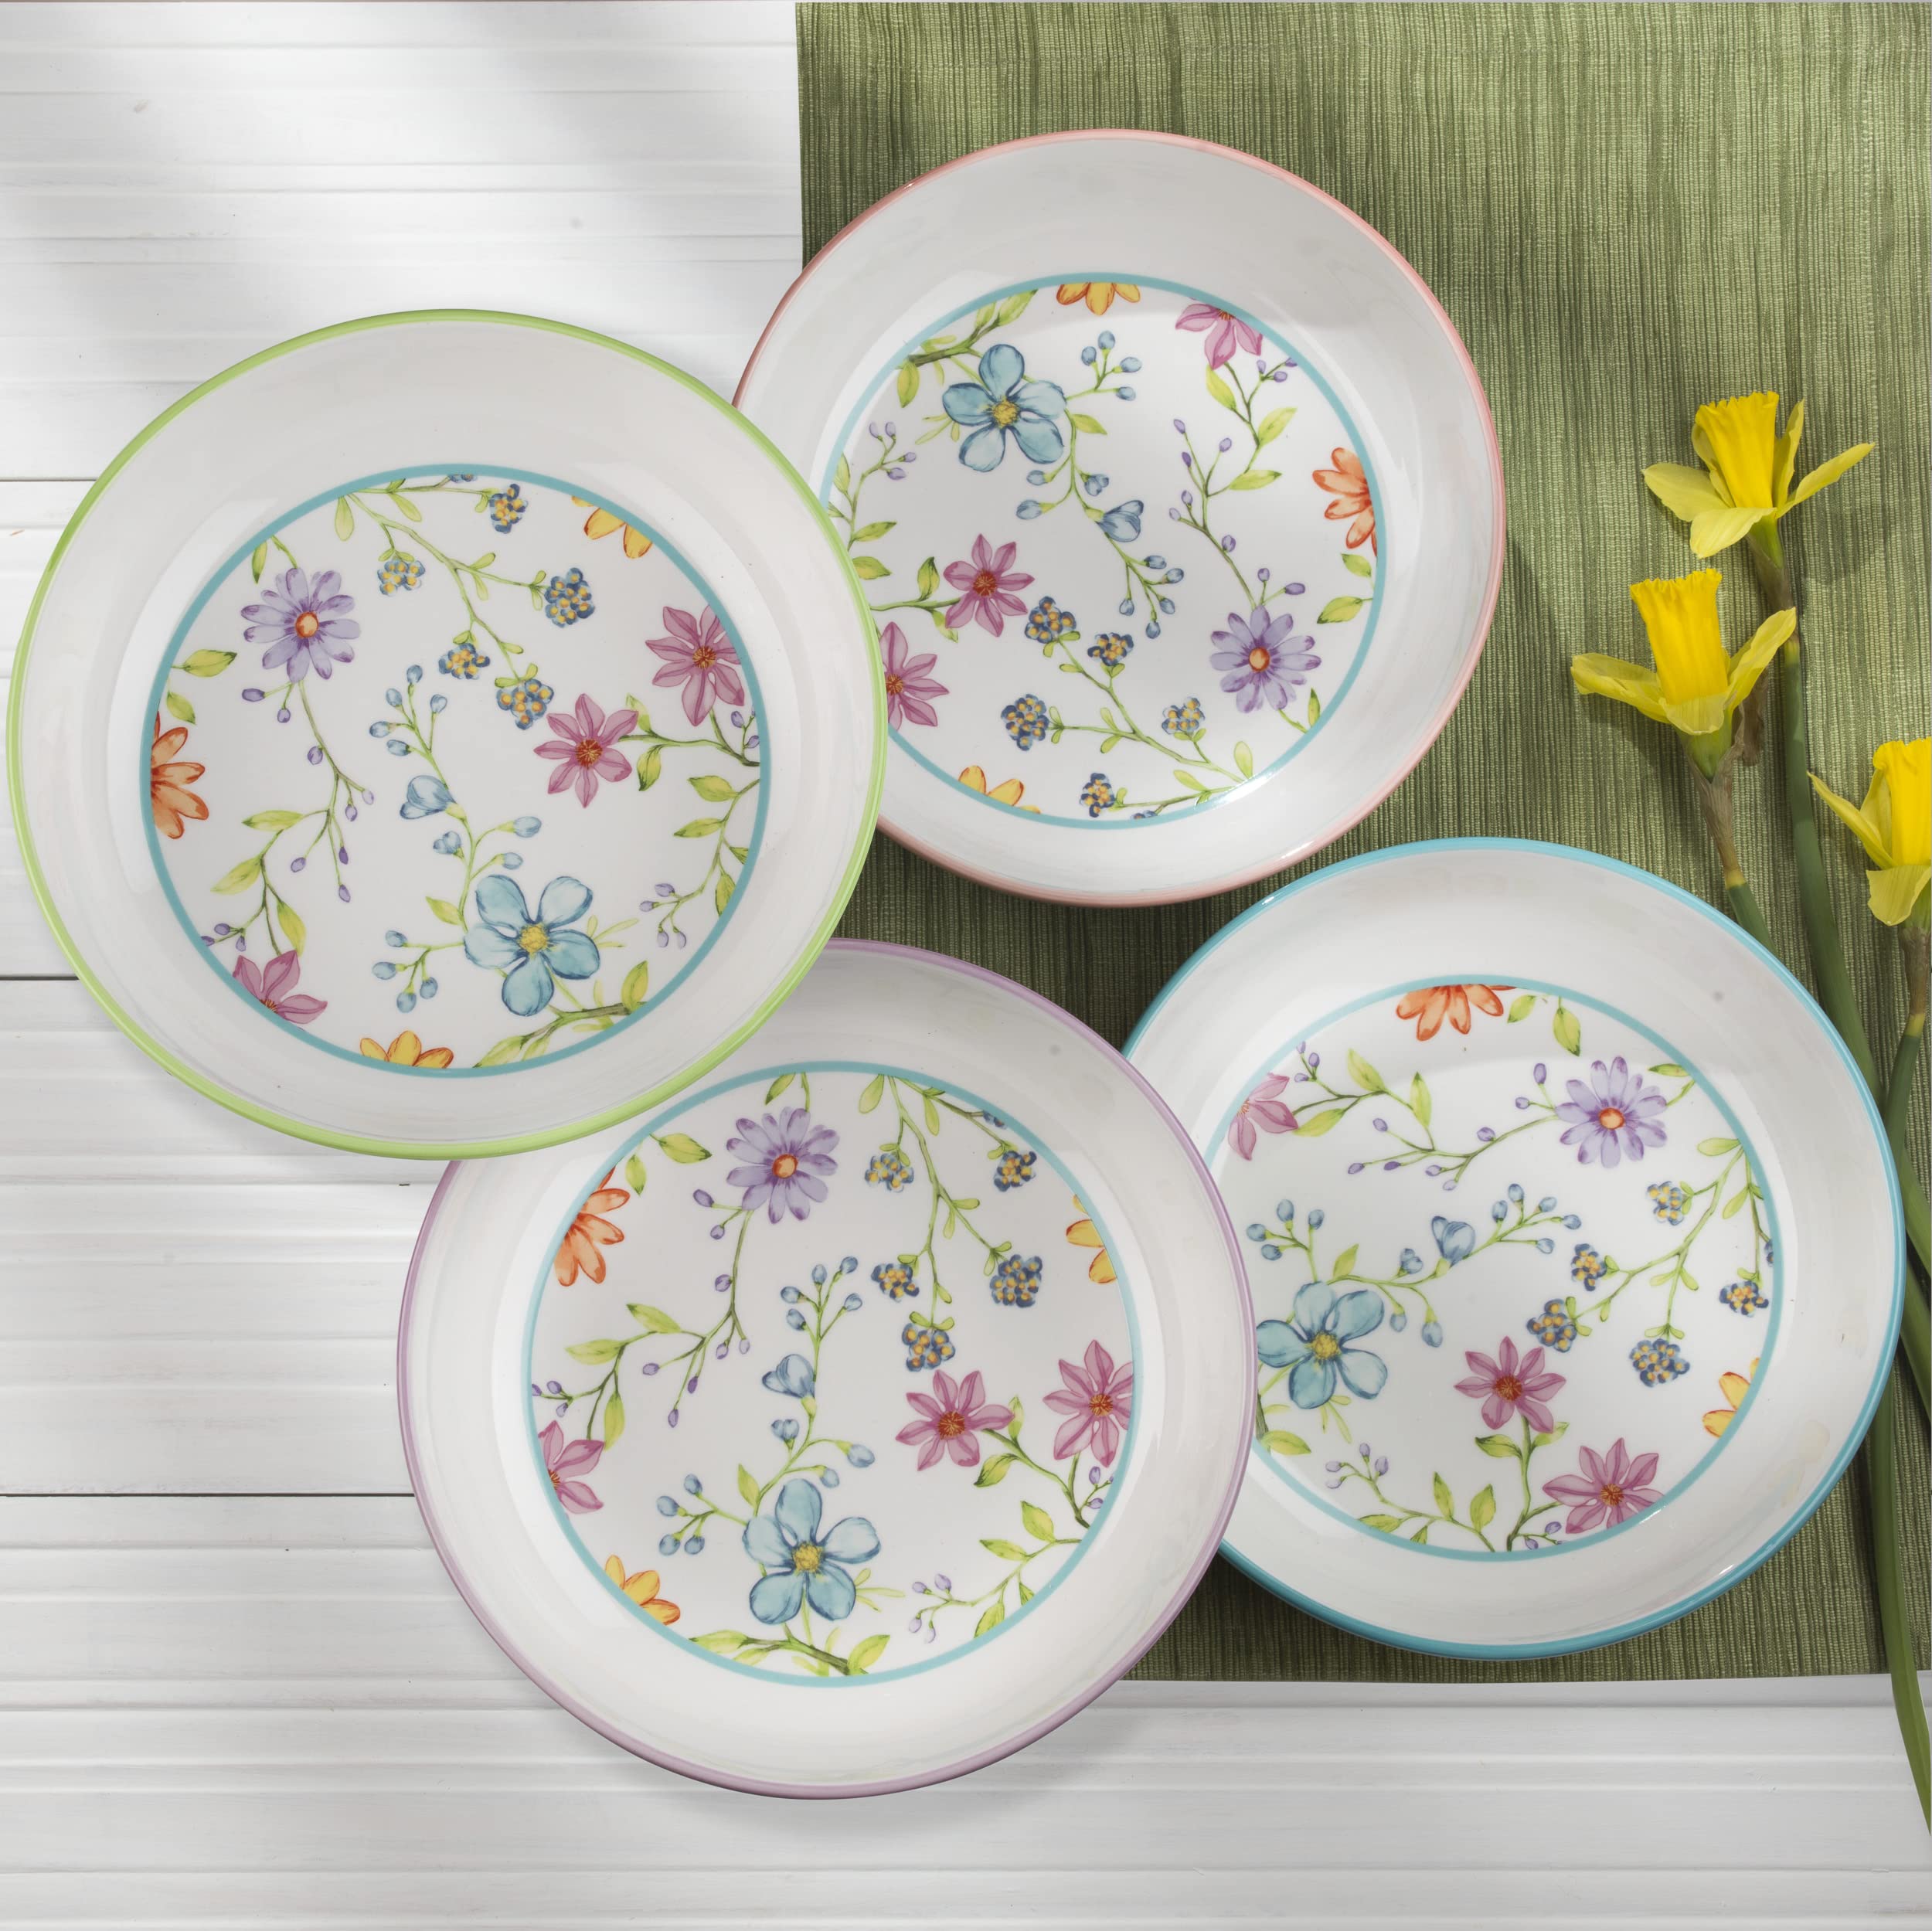 Euro Ceramica Charlotte Collection Pasta Bowls Set of 4 Service for 4, Watercolor Floral Design in Multicolor White Pink